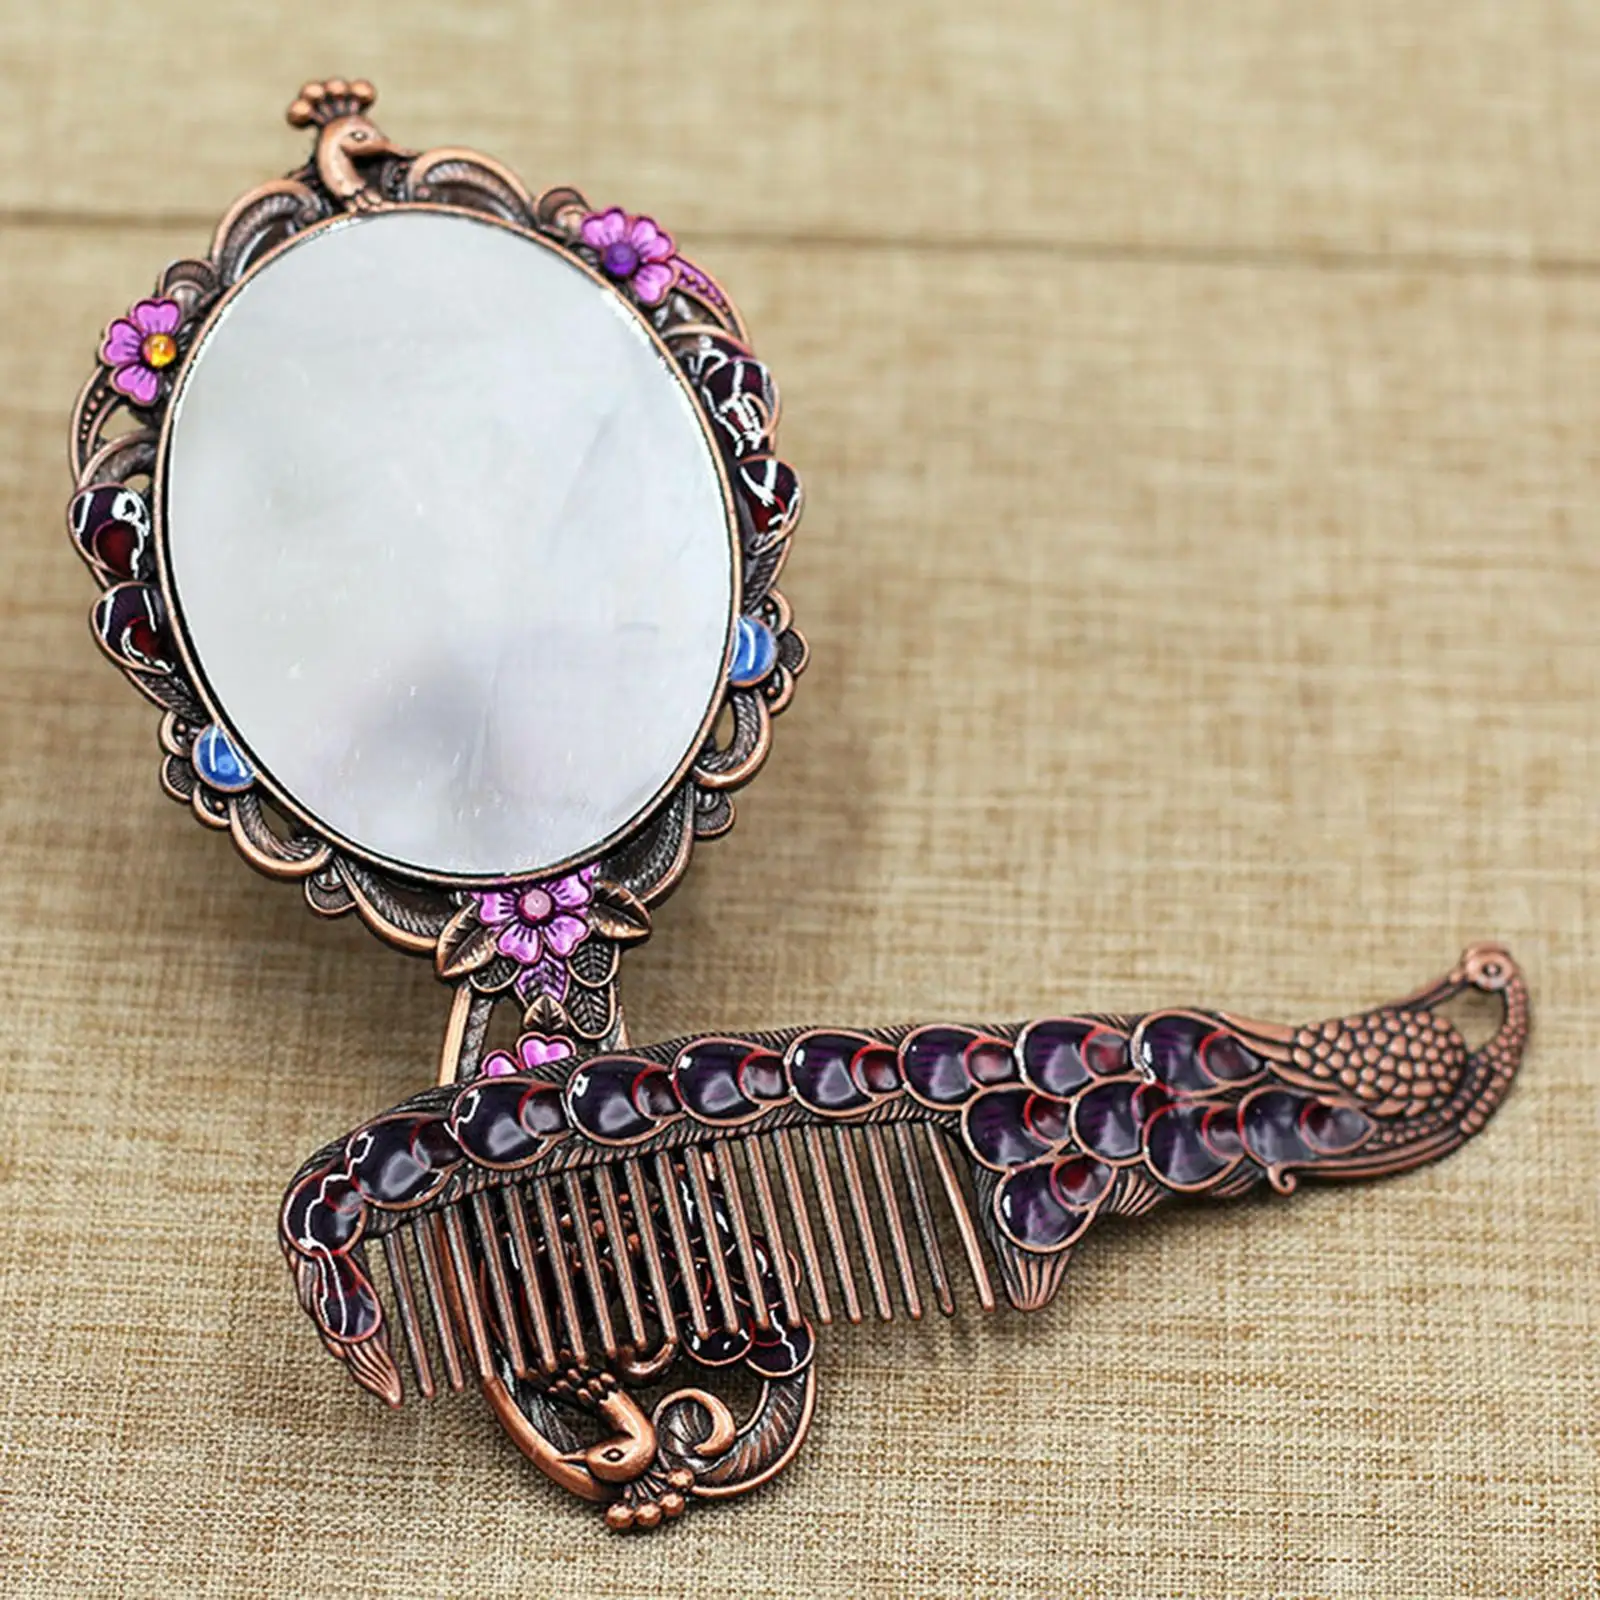 Vintage Style Spreading Tail Peacock Embossing Make  Hand Held Comb Set Girl Gift for Women Salon Dressing Vanity Mirror Travel